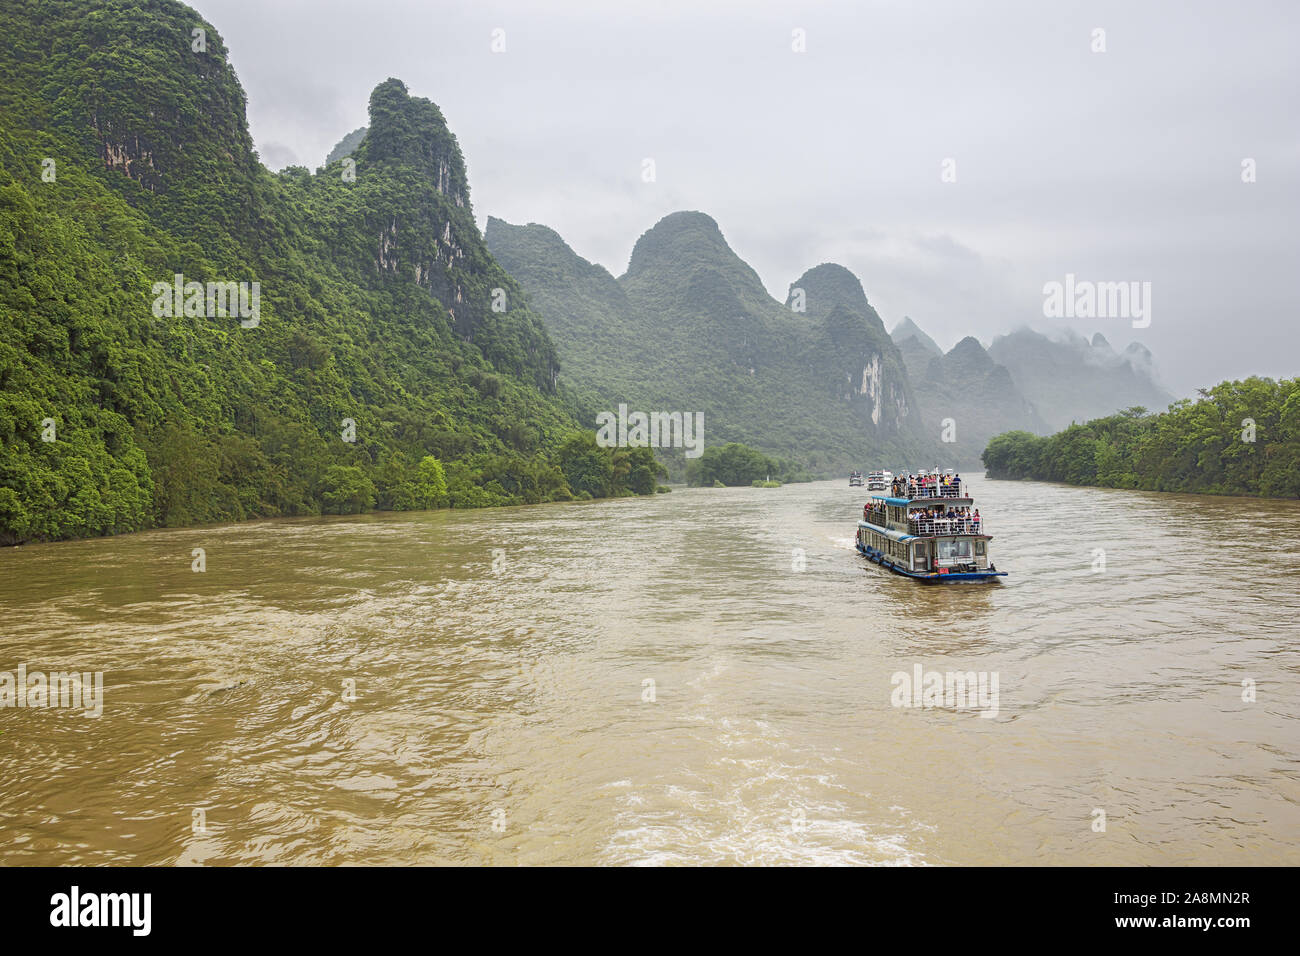 Editorial: GUILIN, GUANGXI, CHINA, April 19, 2019 - River cruise boats navigating in convoy on the Li River near Guilin Stock Photo